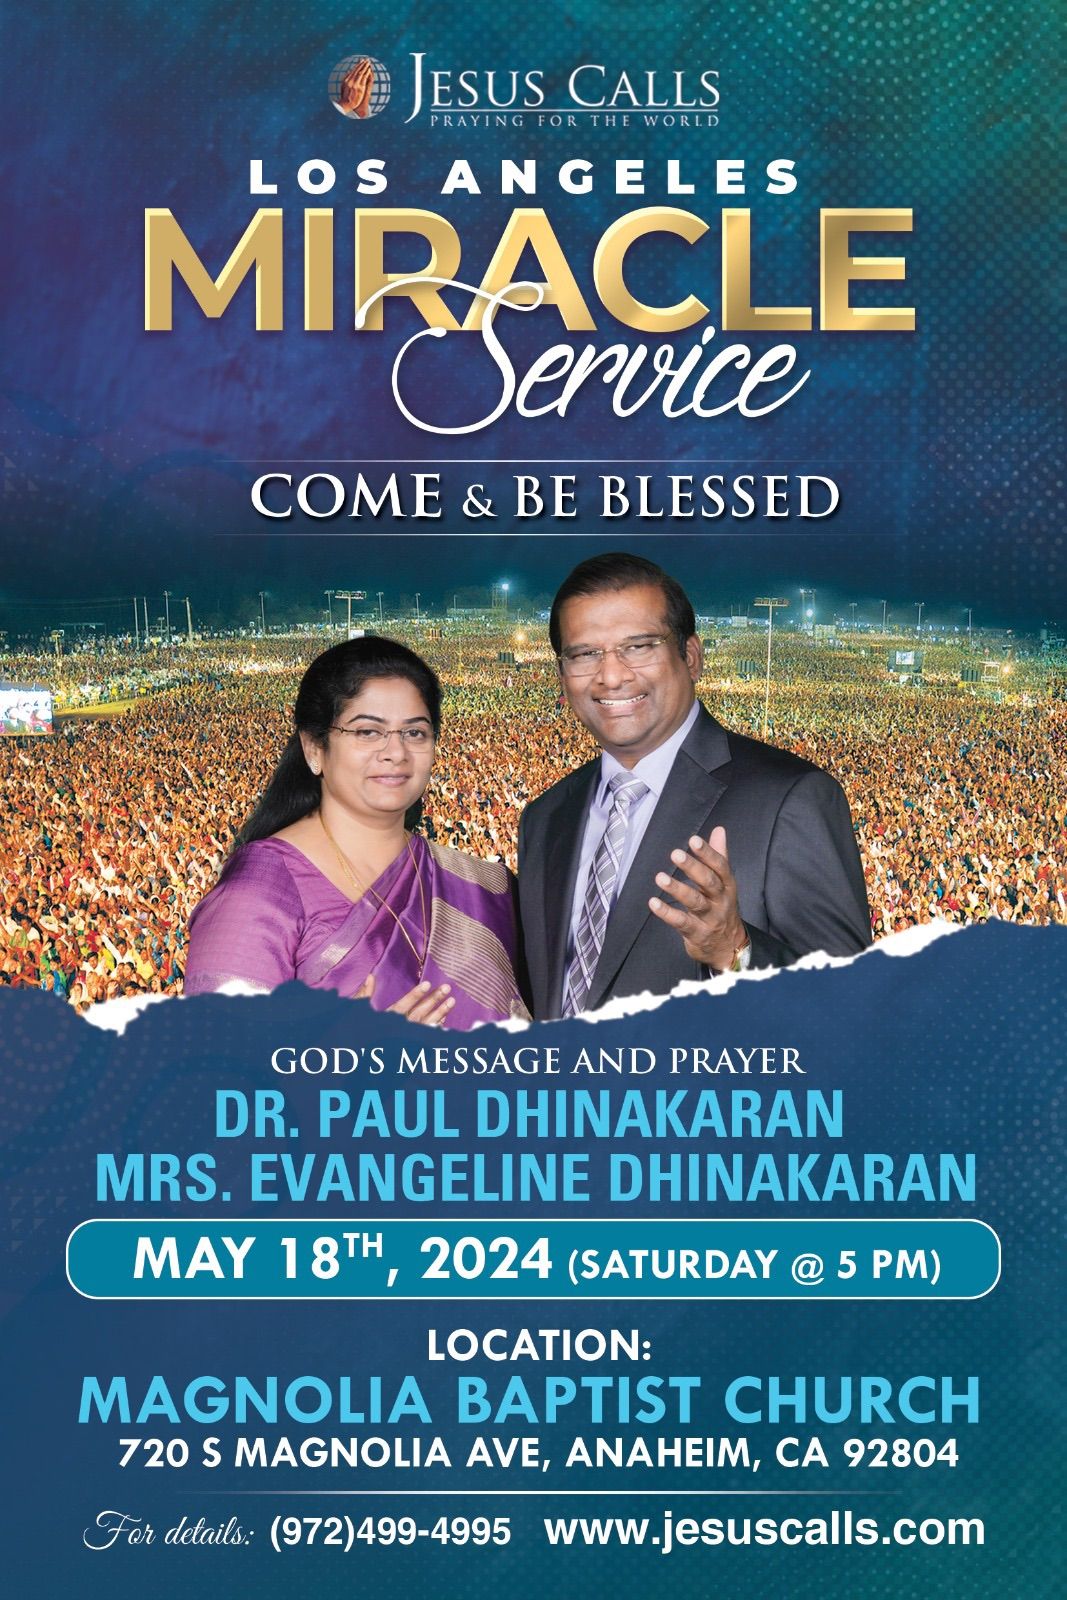 Los Angeles Miracle Service